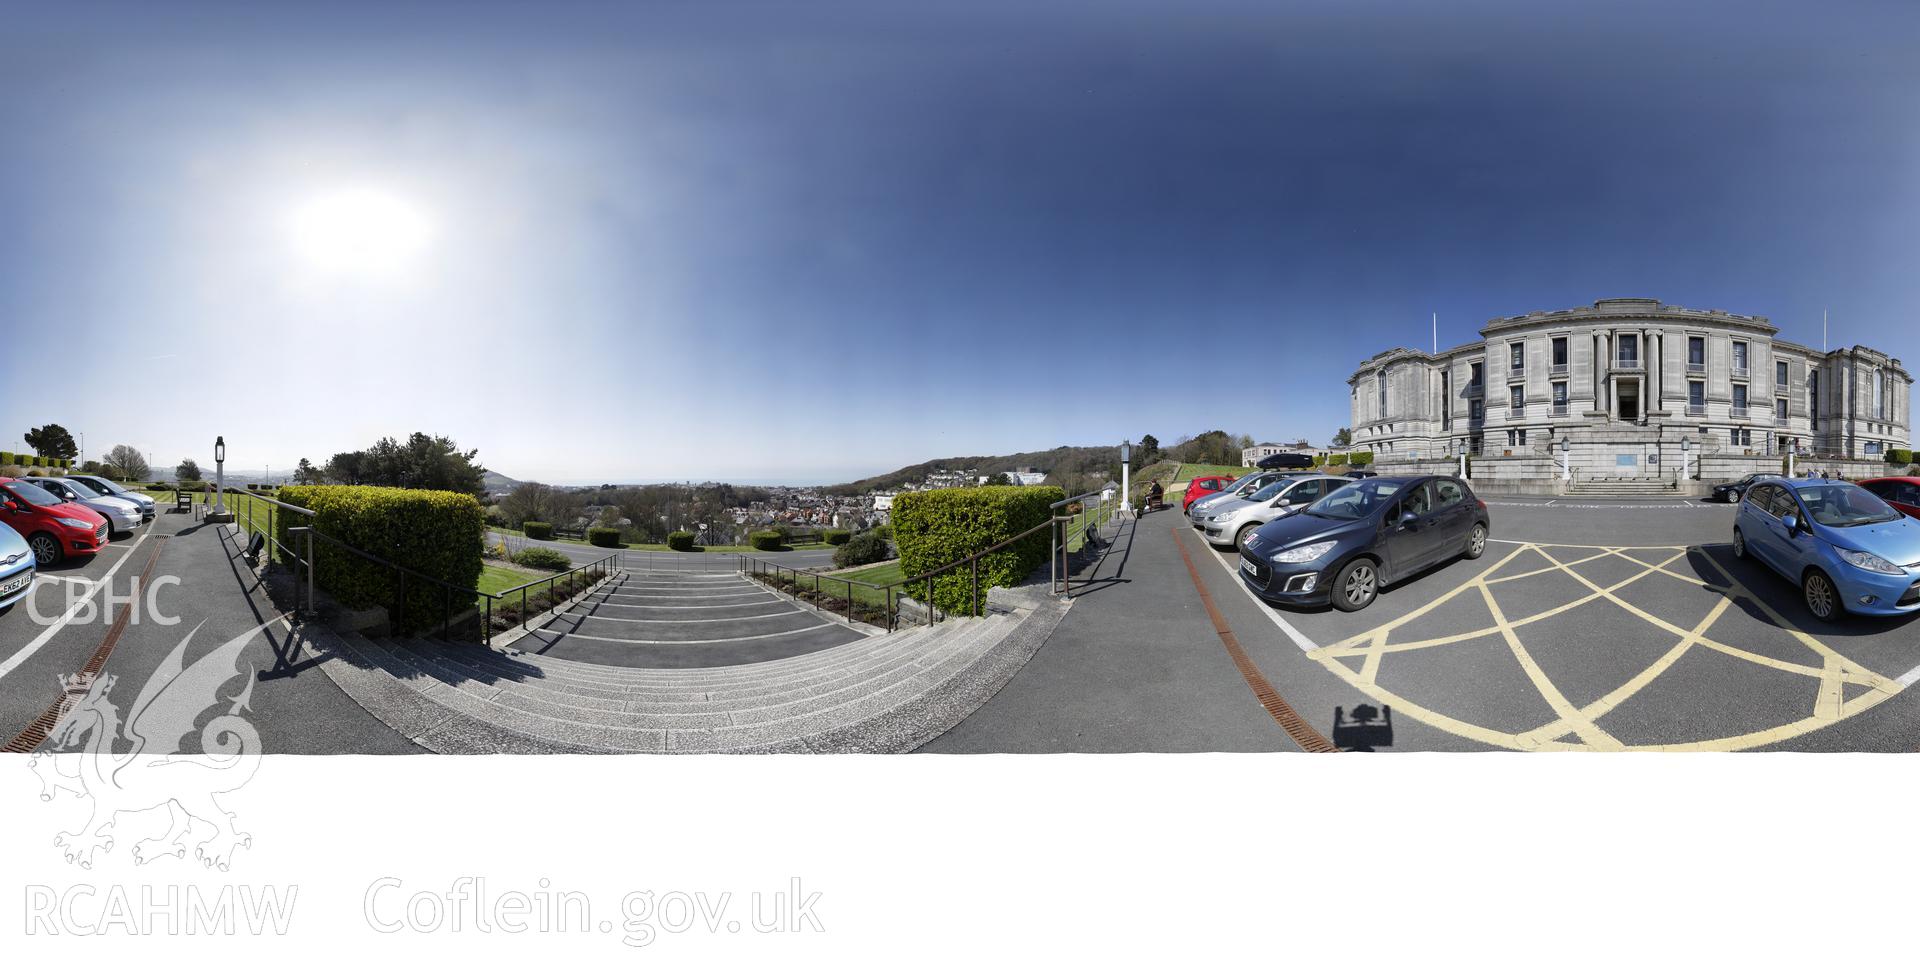 Reduced resolution Tiff of stitched images from in front of the National Library of Wales, Aberystwyth produced by Susan Fielding and Rita Singer, 2018. Produced through European Travellers to Wales project.